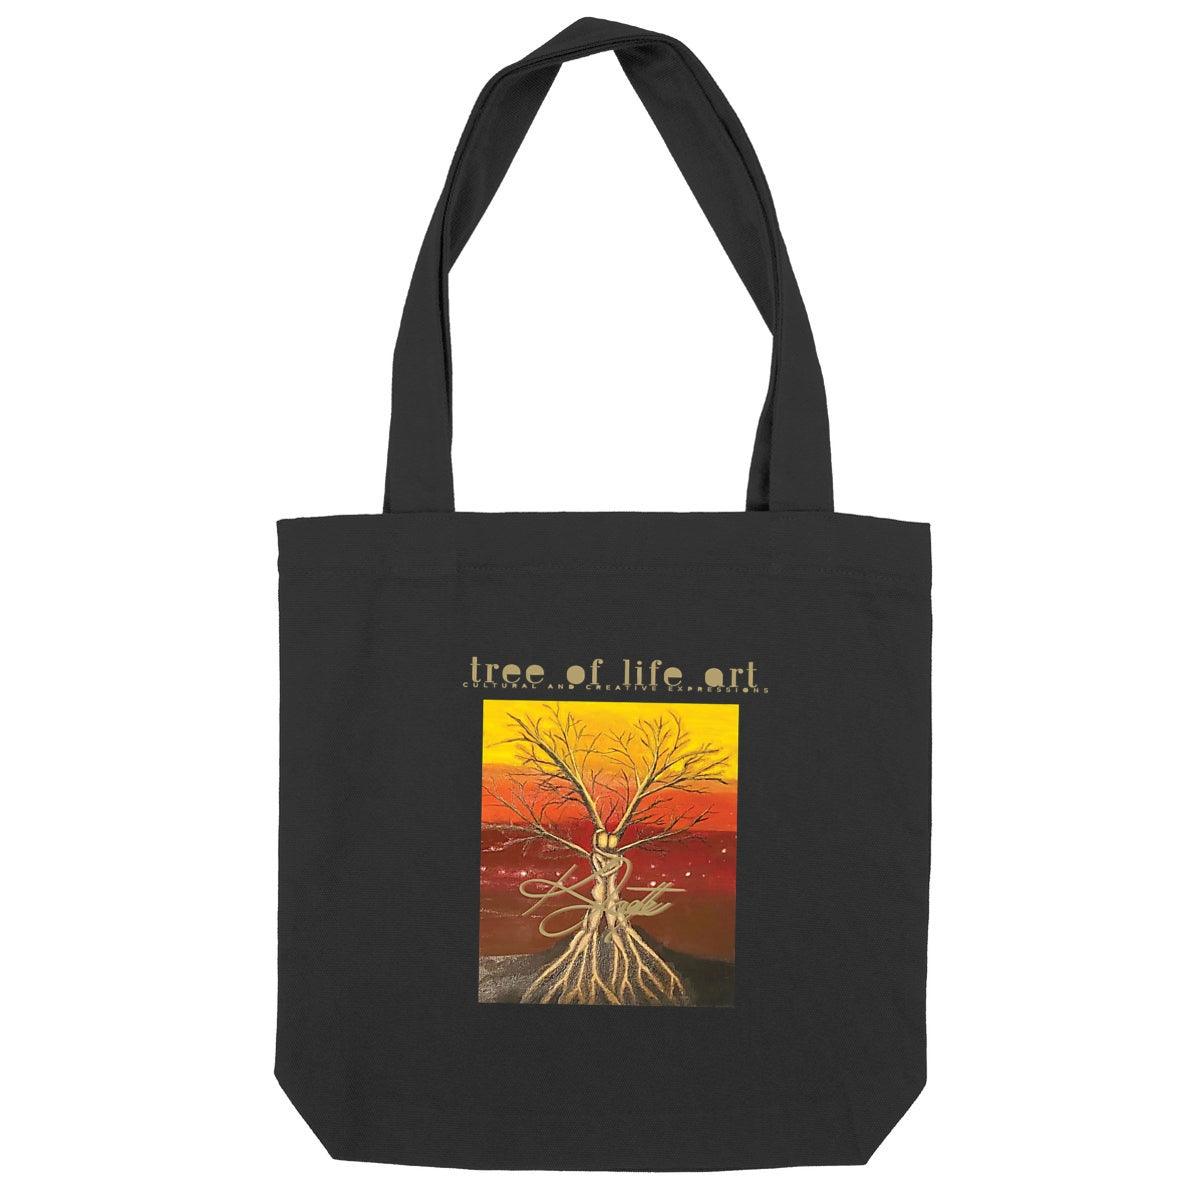 Tree of Life Premium Heavyweight Totebag, crafted from recycled materials, designed by Tree of Life Art, offers durability and sustainability